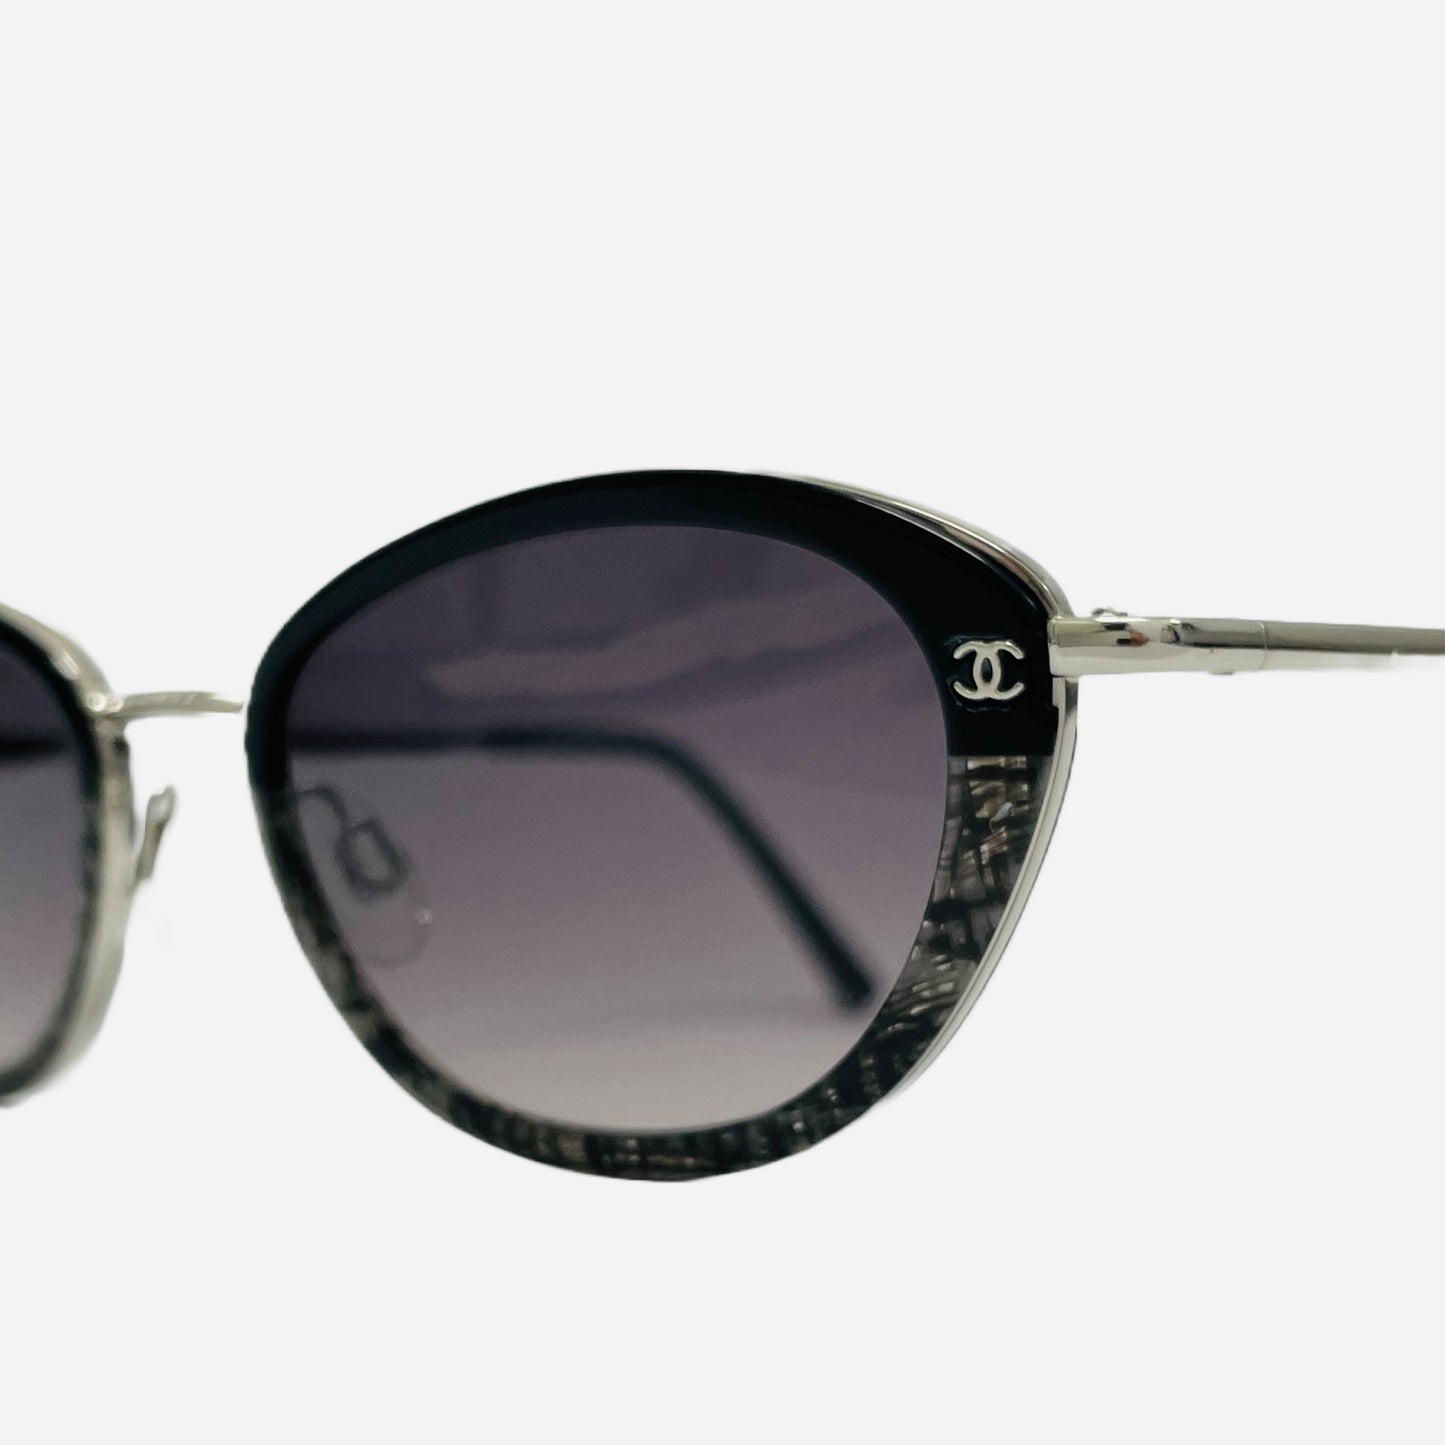 The-Seekers-Vintage-Coco-Chanel-Sunglasses-Sonnenbrille-Customized-2159-detail